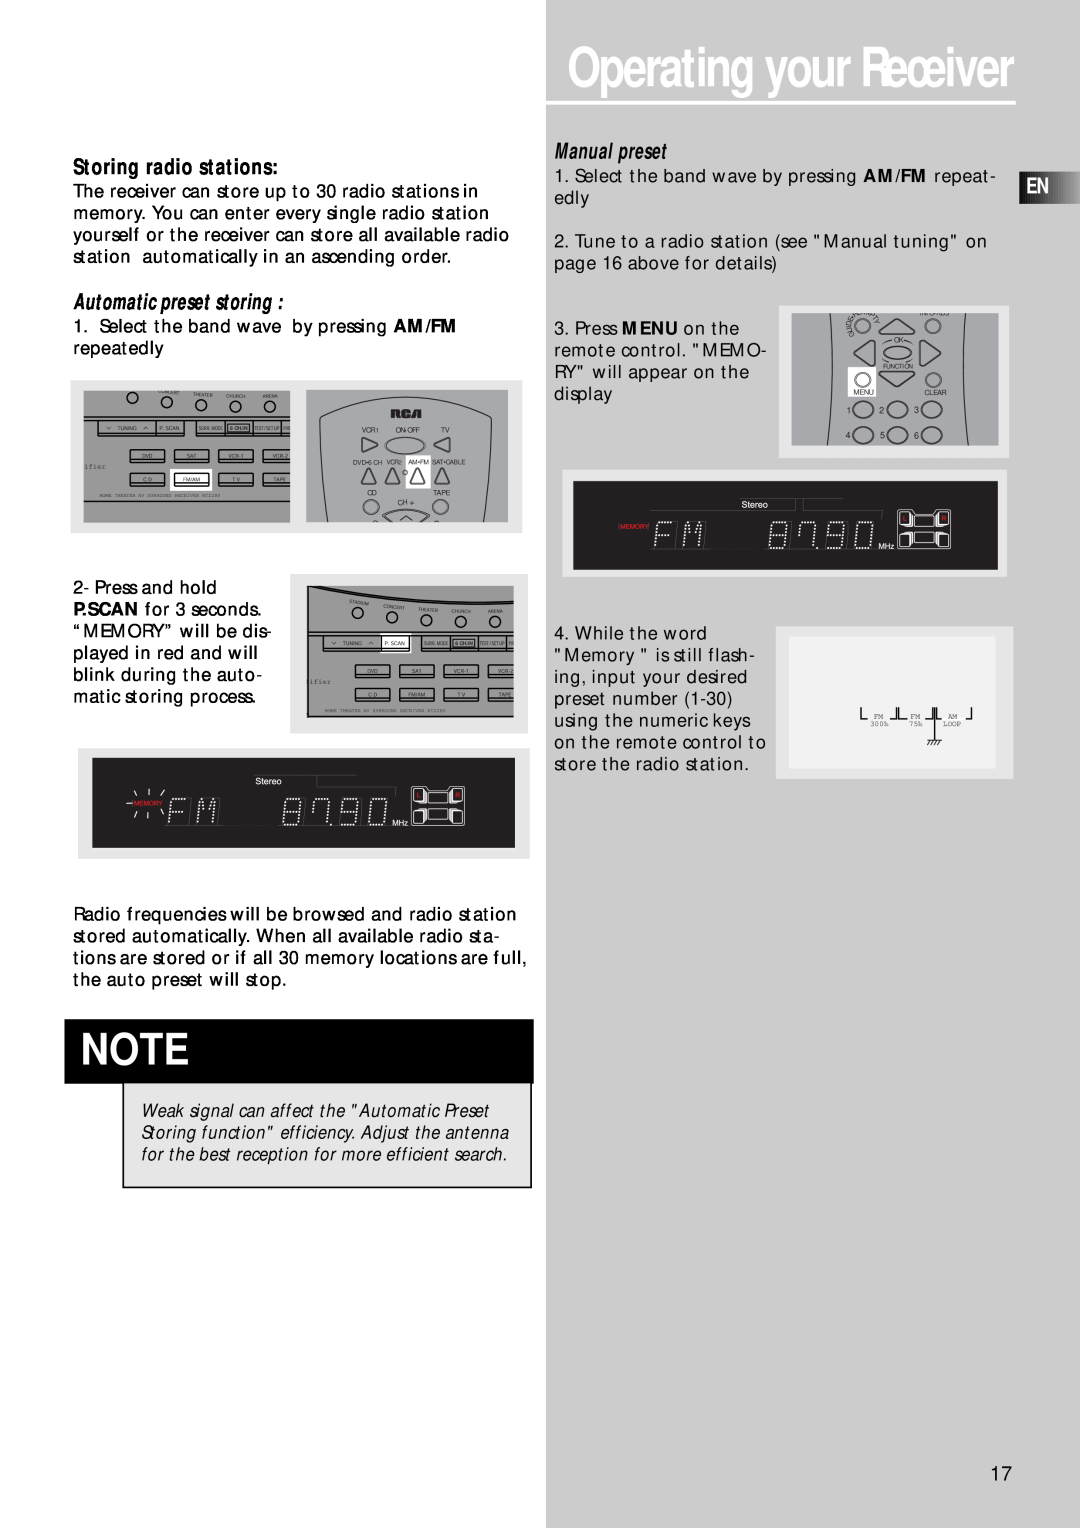 RCA RT2280, RT2250R user manual Operating your Receiver, Storing radio stations, Automatic preset storing, Manual preset 